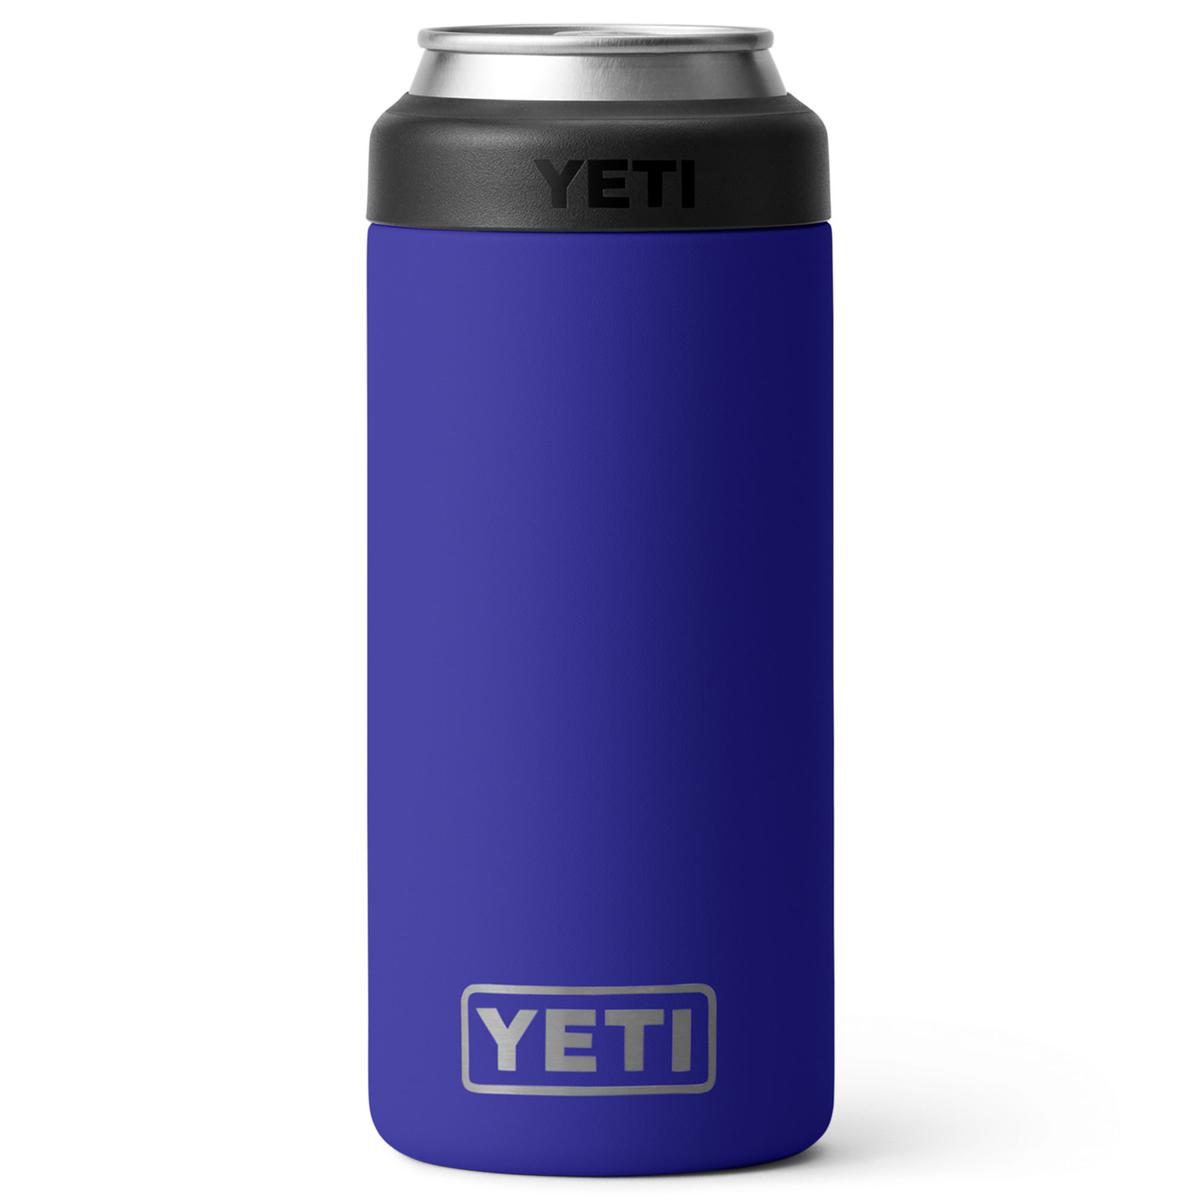 YETI Rambler 12 oz. Colster Can Insulator for Standard Size Cans, Nordic  Purple